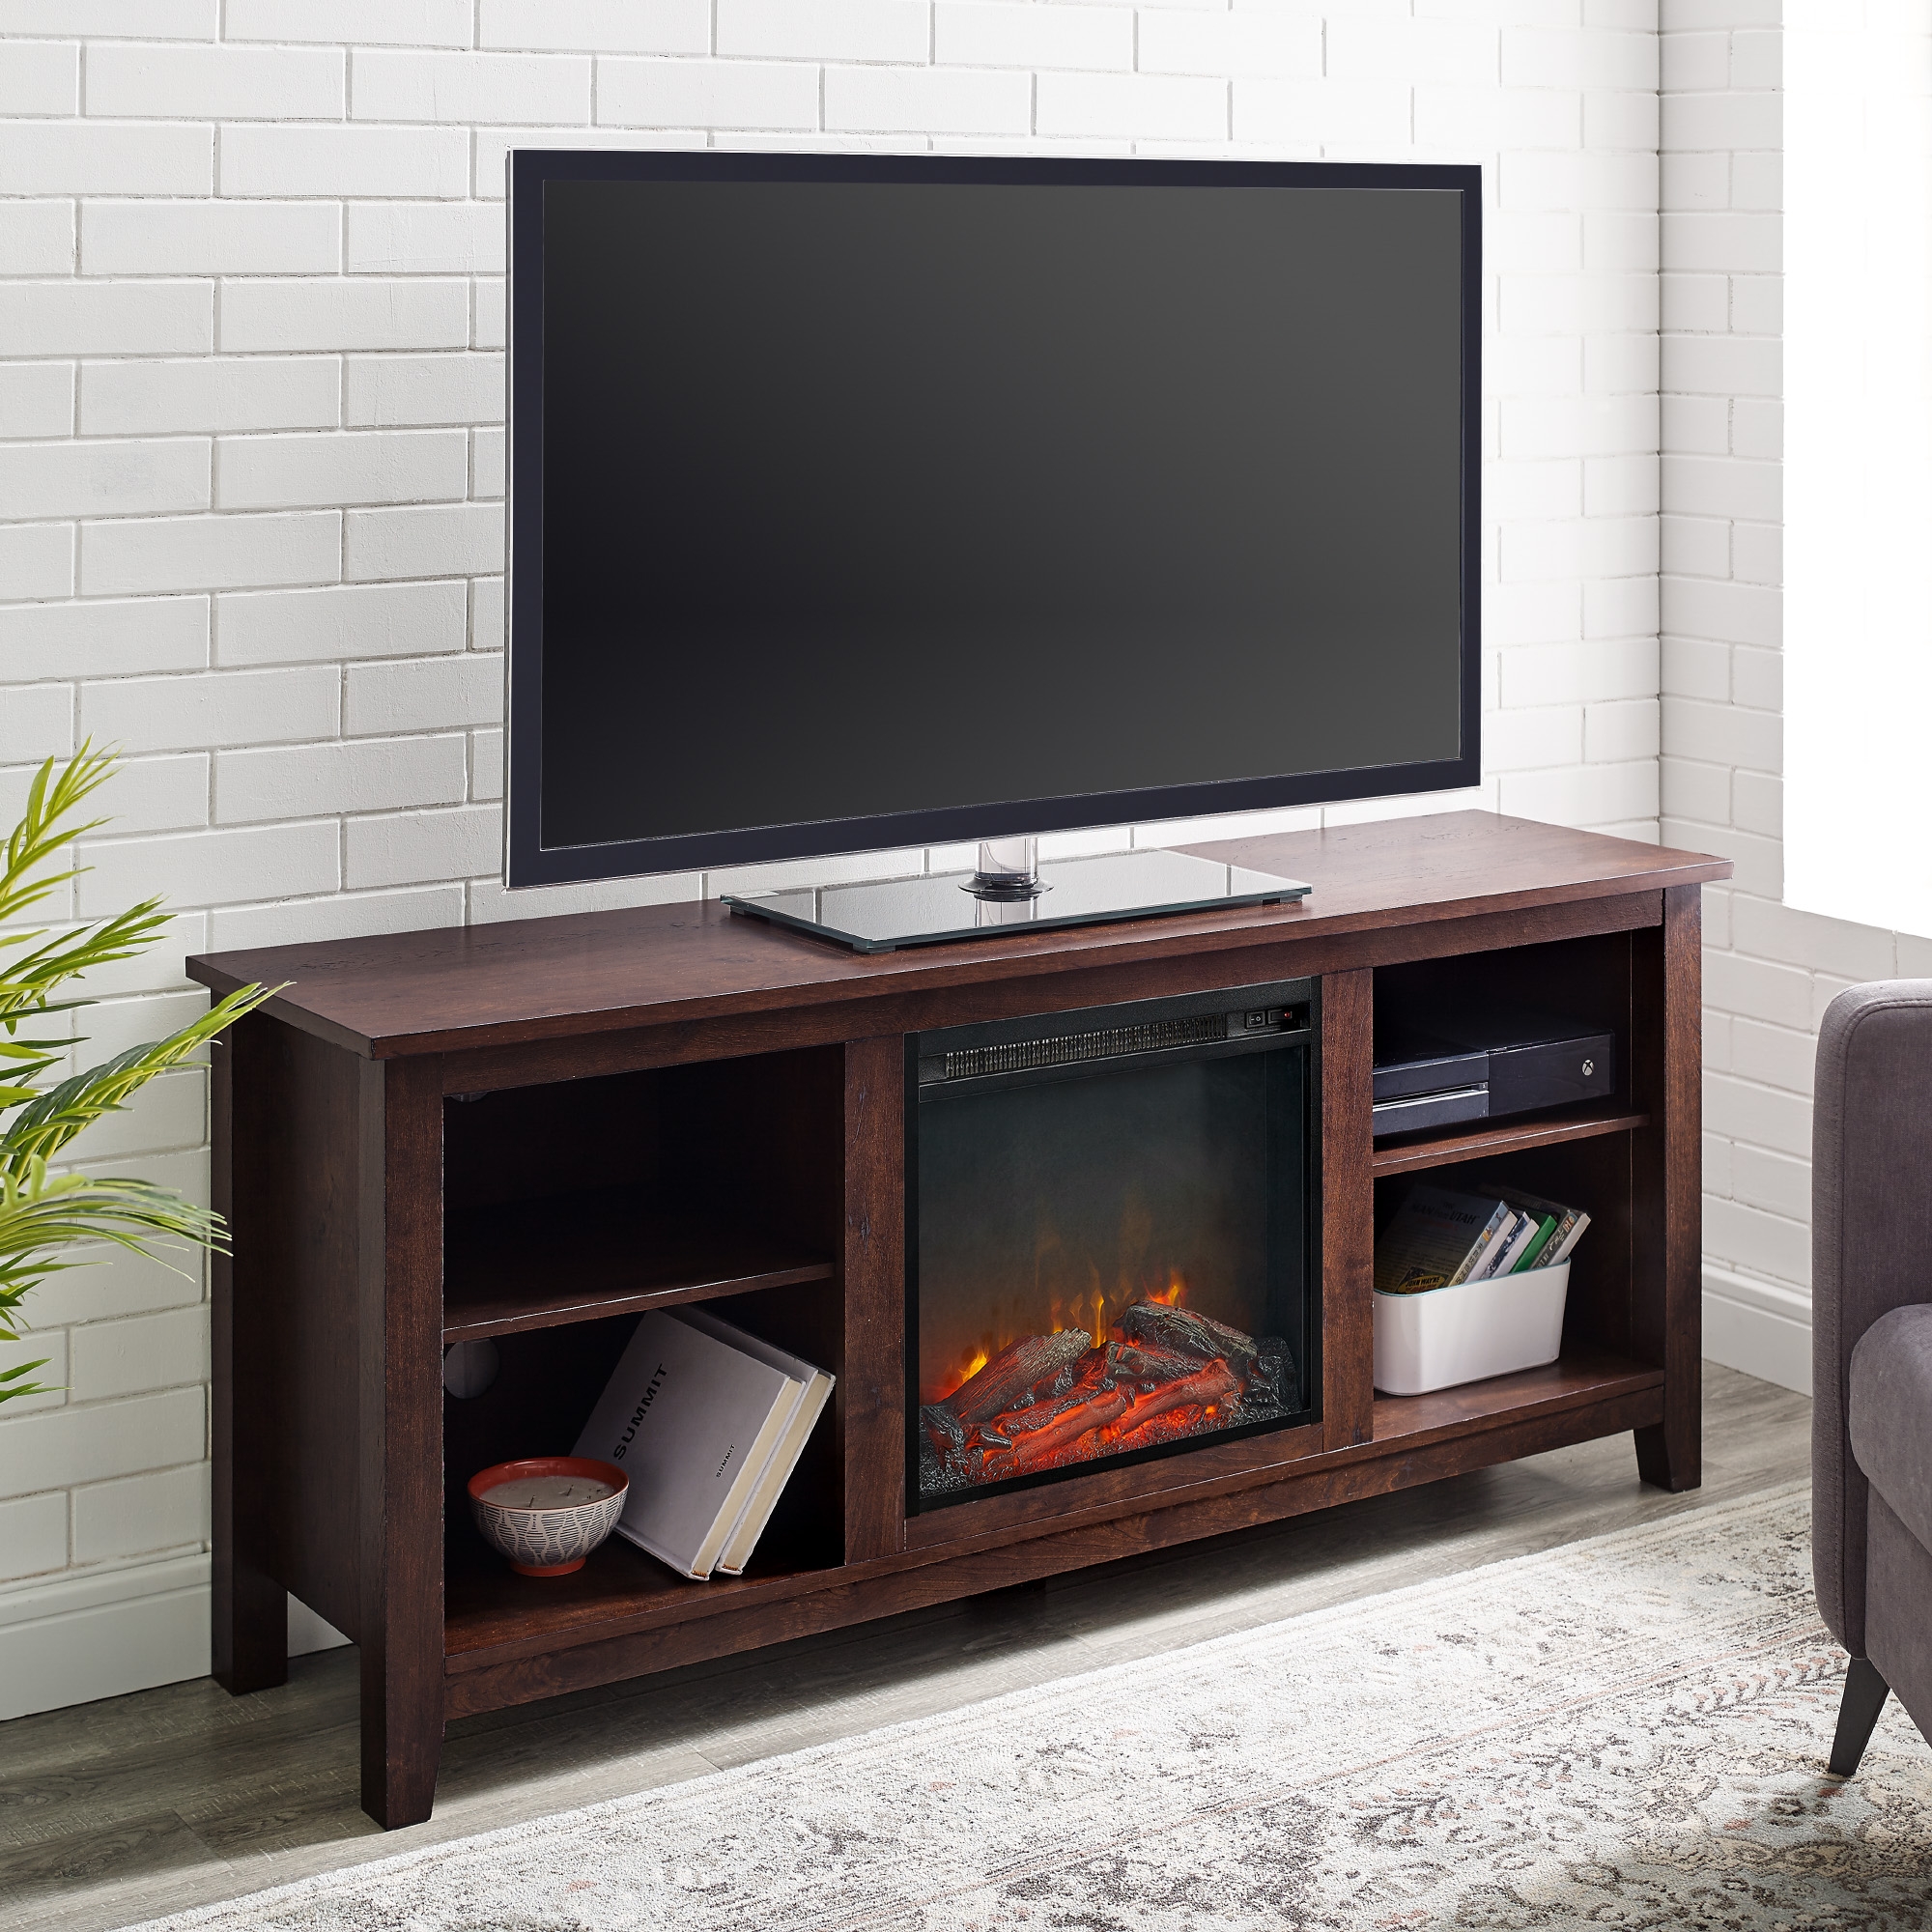 Essential 58" Traditional Rustic Farmhouse Electric Fireplace TV Stand - Brown - Image 4